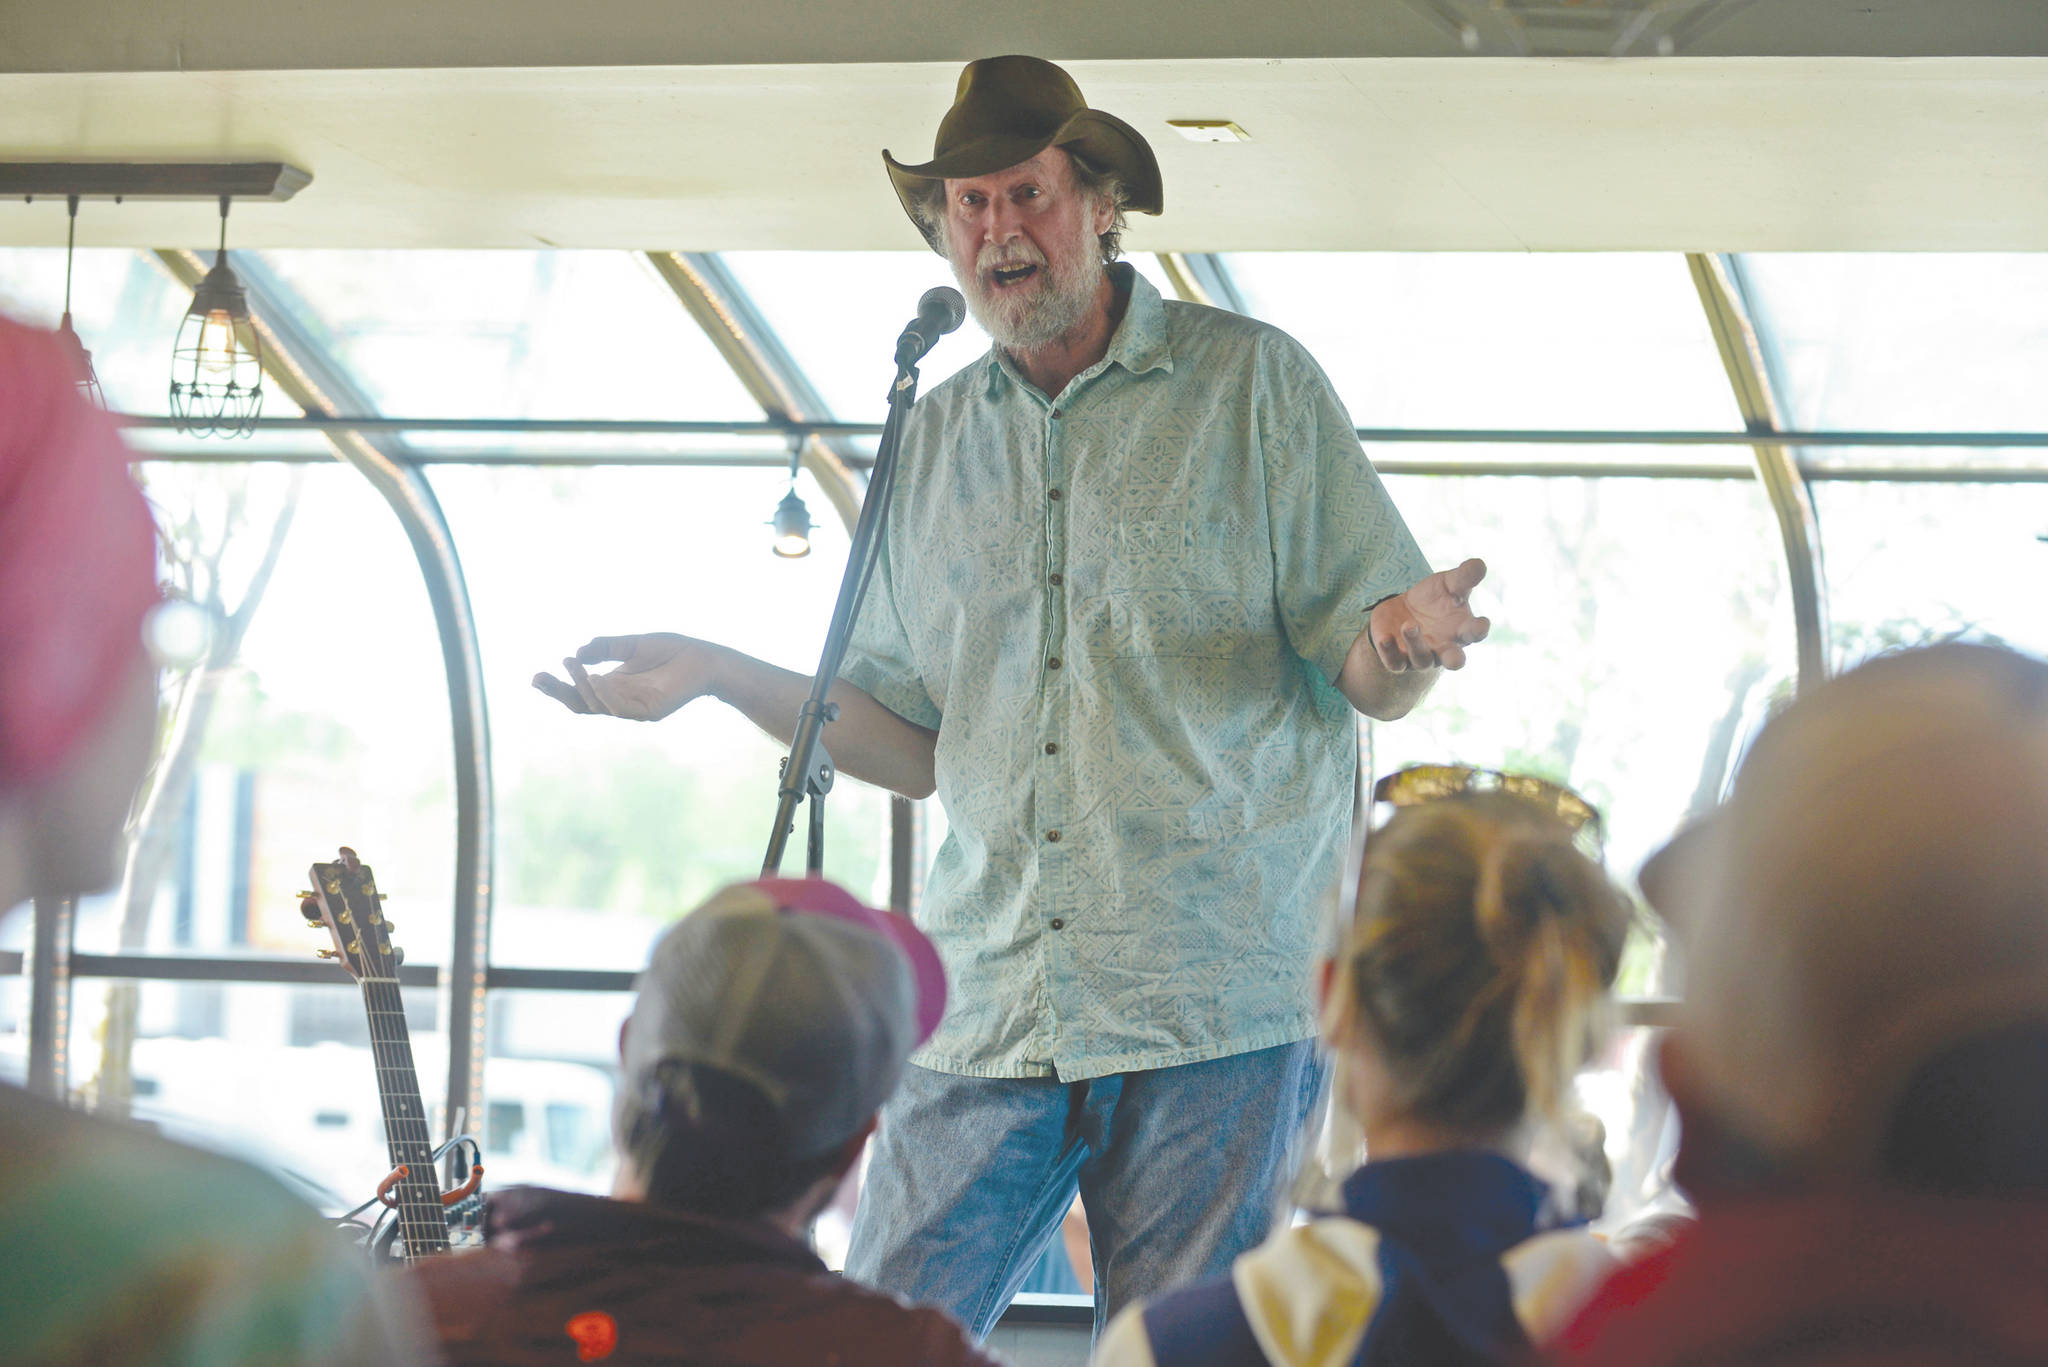 Bill Holt tells a fishing tale at Odie’s Deli on Friday, June 2, 2017 in Soldotna, Alaska. Holt was among the seven storytellers in the latest session of True Tales Told Live, an occasional storytelling event co-founded by Pegge Erkeneff, Jenny Nyman, and Kaitlin Vadla. (Ben Boettger/Peninsula Clarion file)